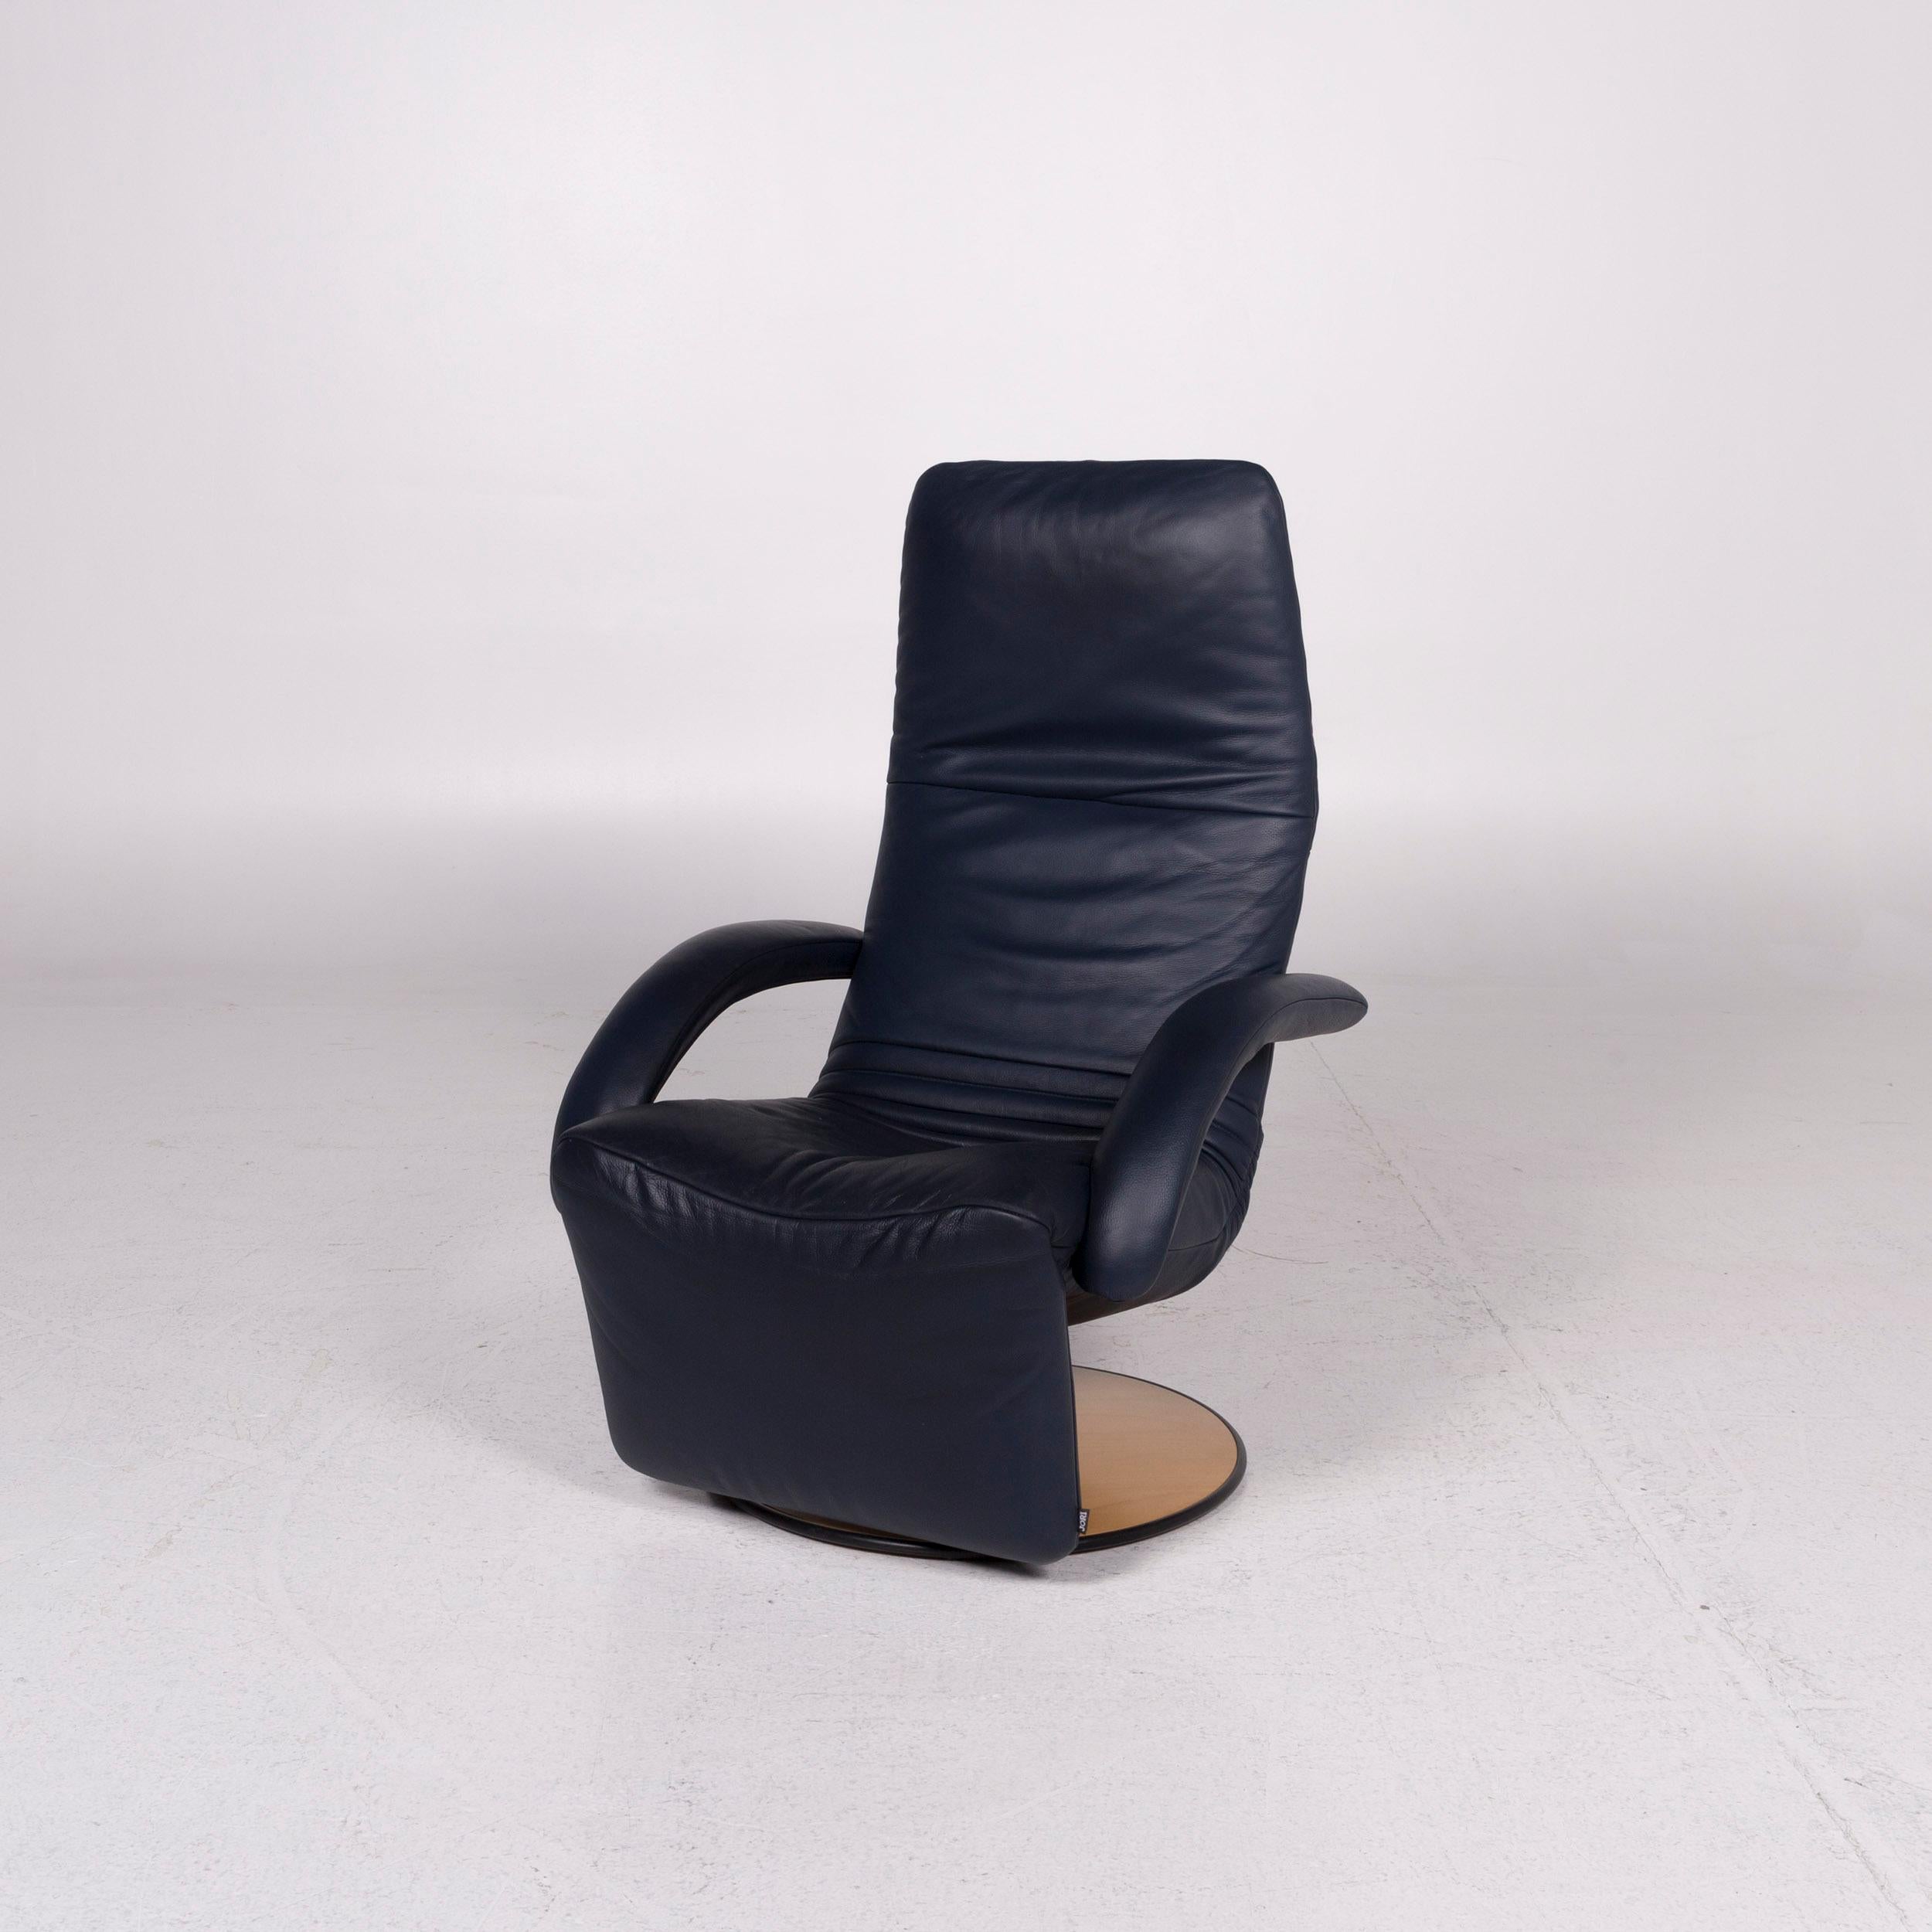 We bring to you a JORI leather armchair blue relax function function.


 Product measurements in centimeters:
 

 Depth 80
Width 72
Height 78
Seat-height 42
Rest-height 63
Seat-depth 50
Seat-width 51
Back-height 72.
   